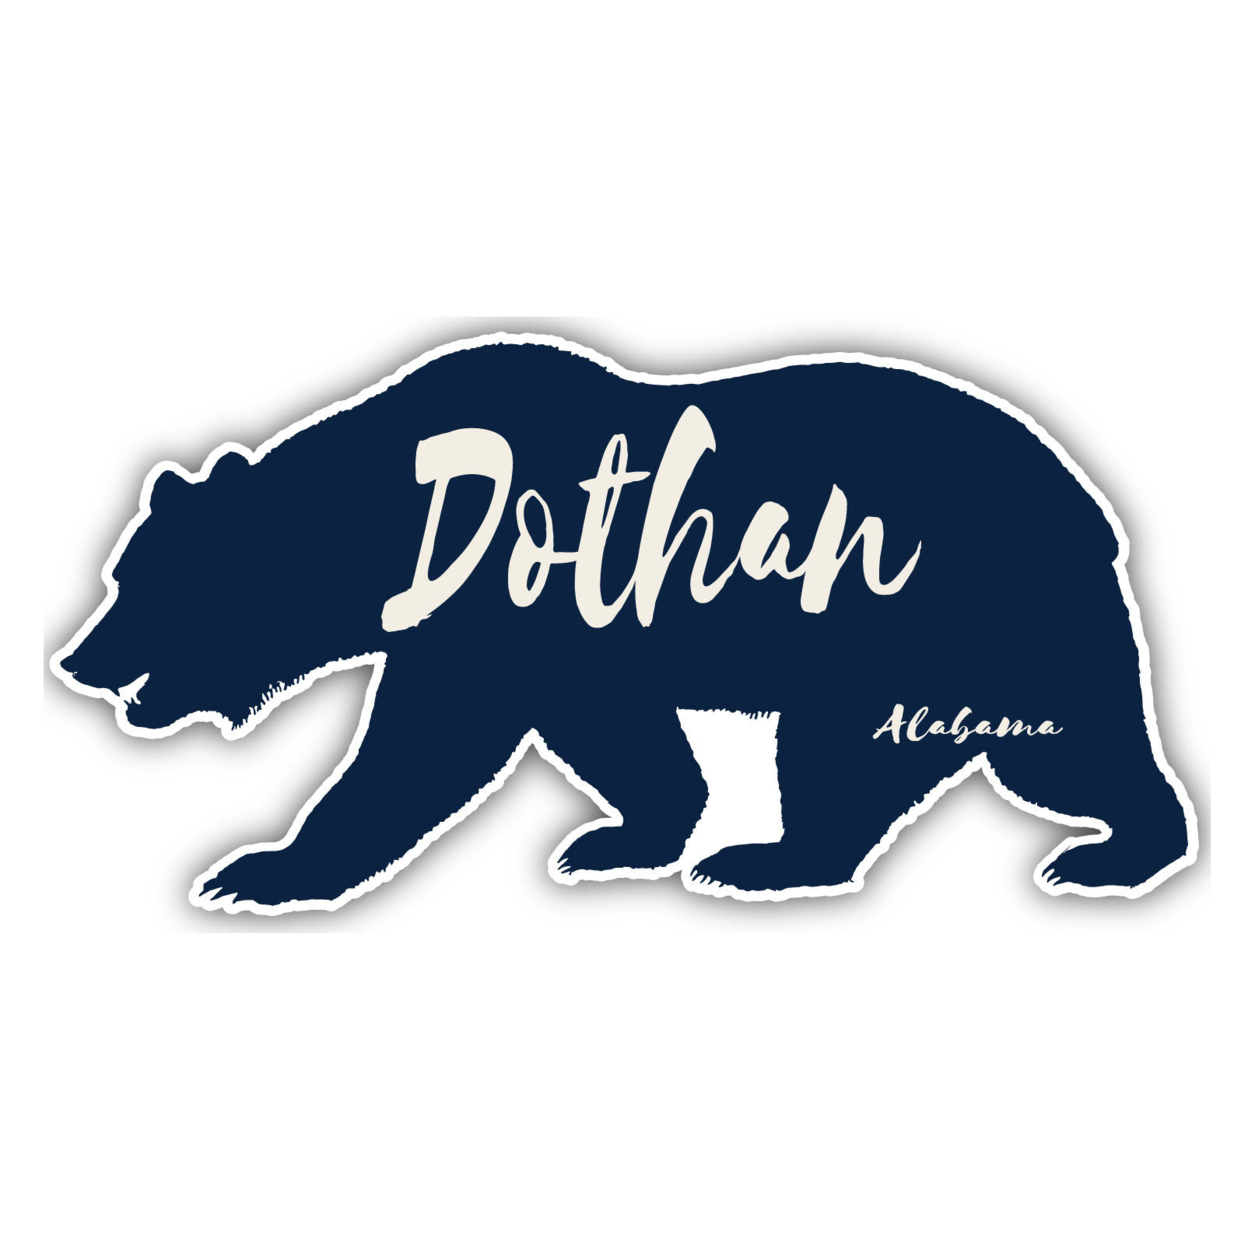 Dothan Alabama Souvenir Decorative Stickers (Choose Theme And Size) - 4-Pack, 10-Inch, Camp Life